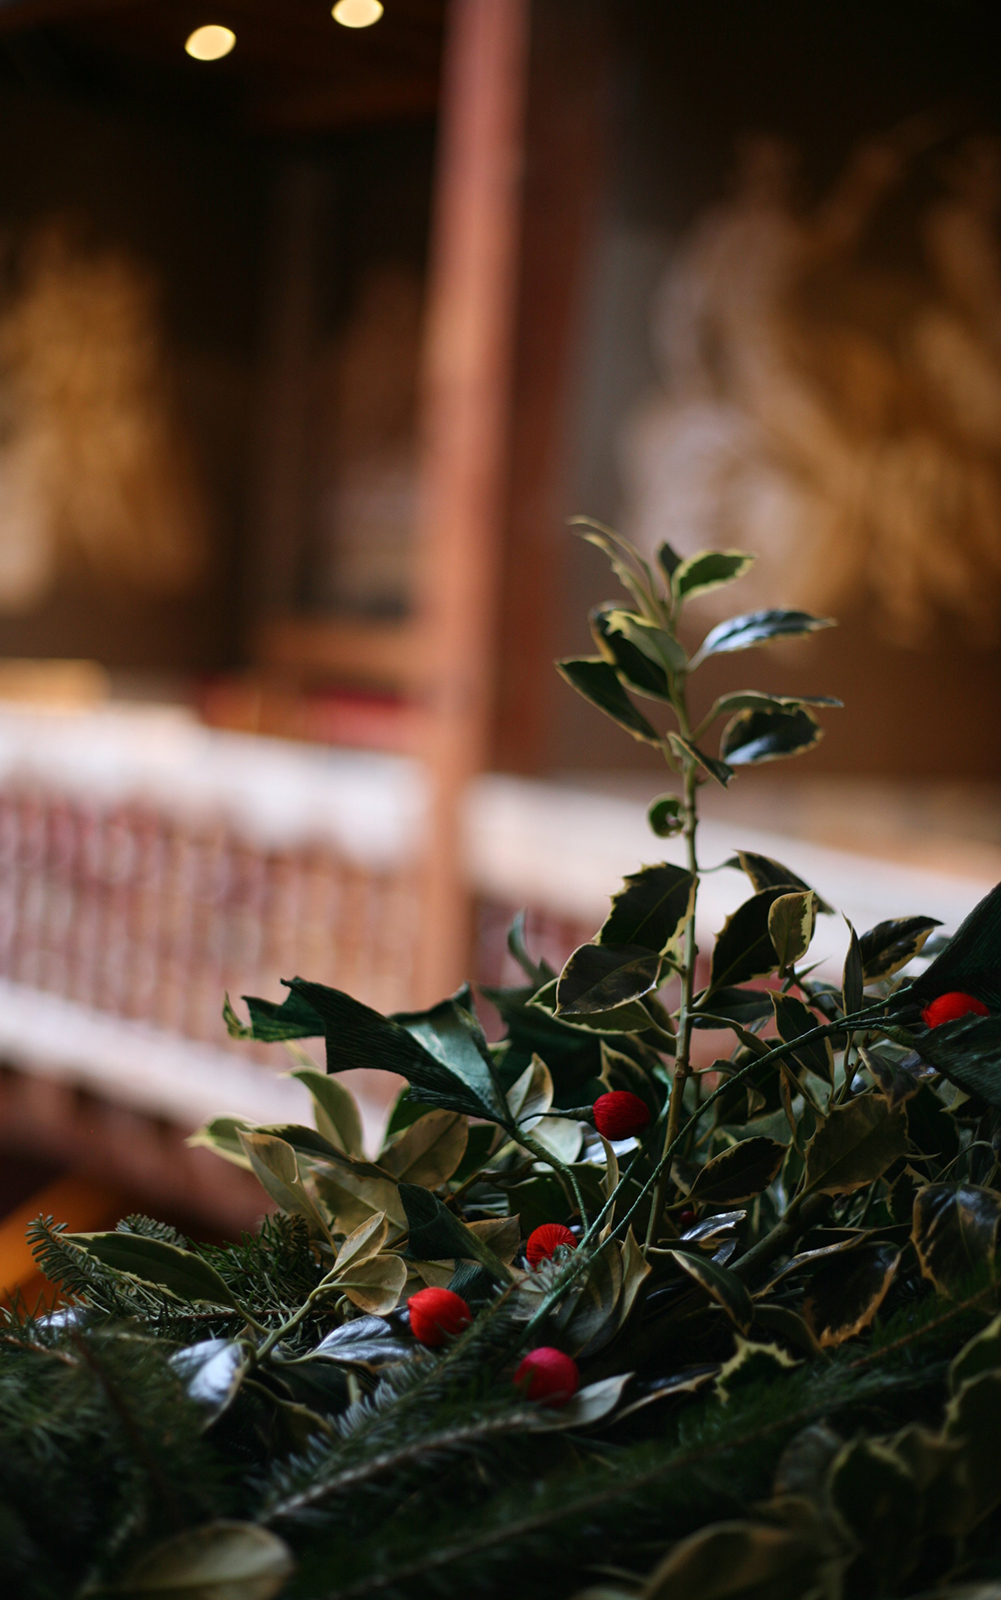 A close up of a holly wreath wrapped around wooden banisters.